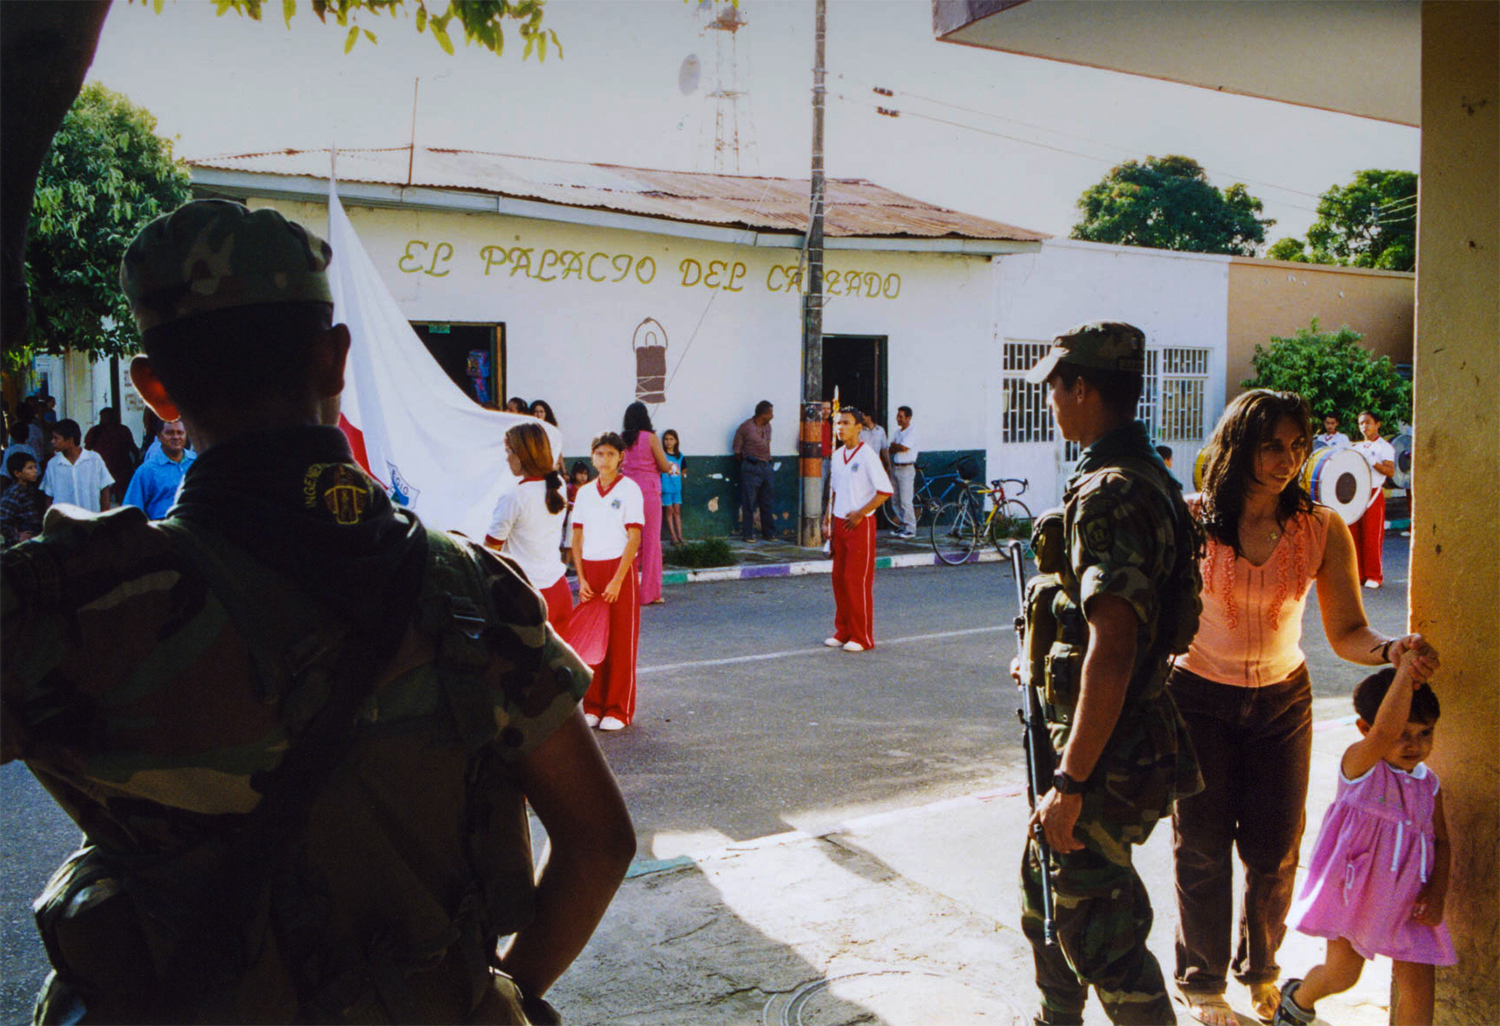 <p>Soldiers secure a parade in Tame, a rural town rocked by the violence of Colombia's civil war. </p>